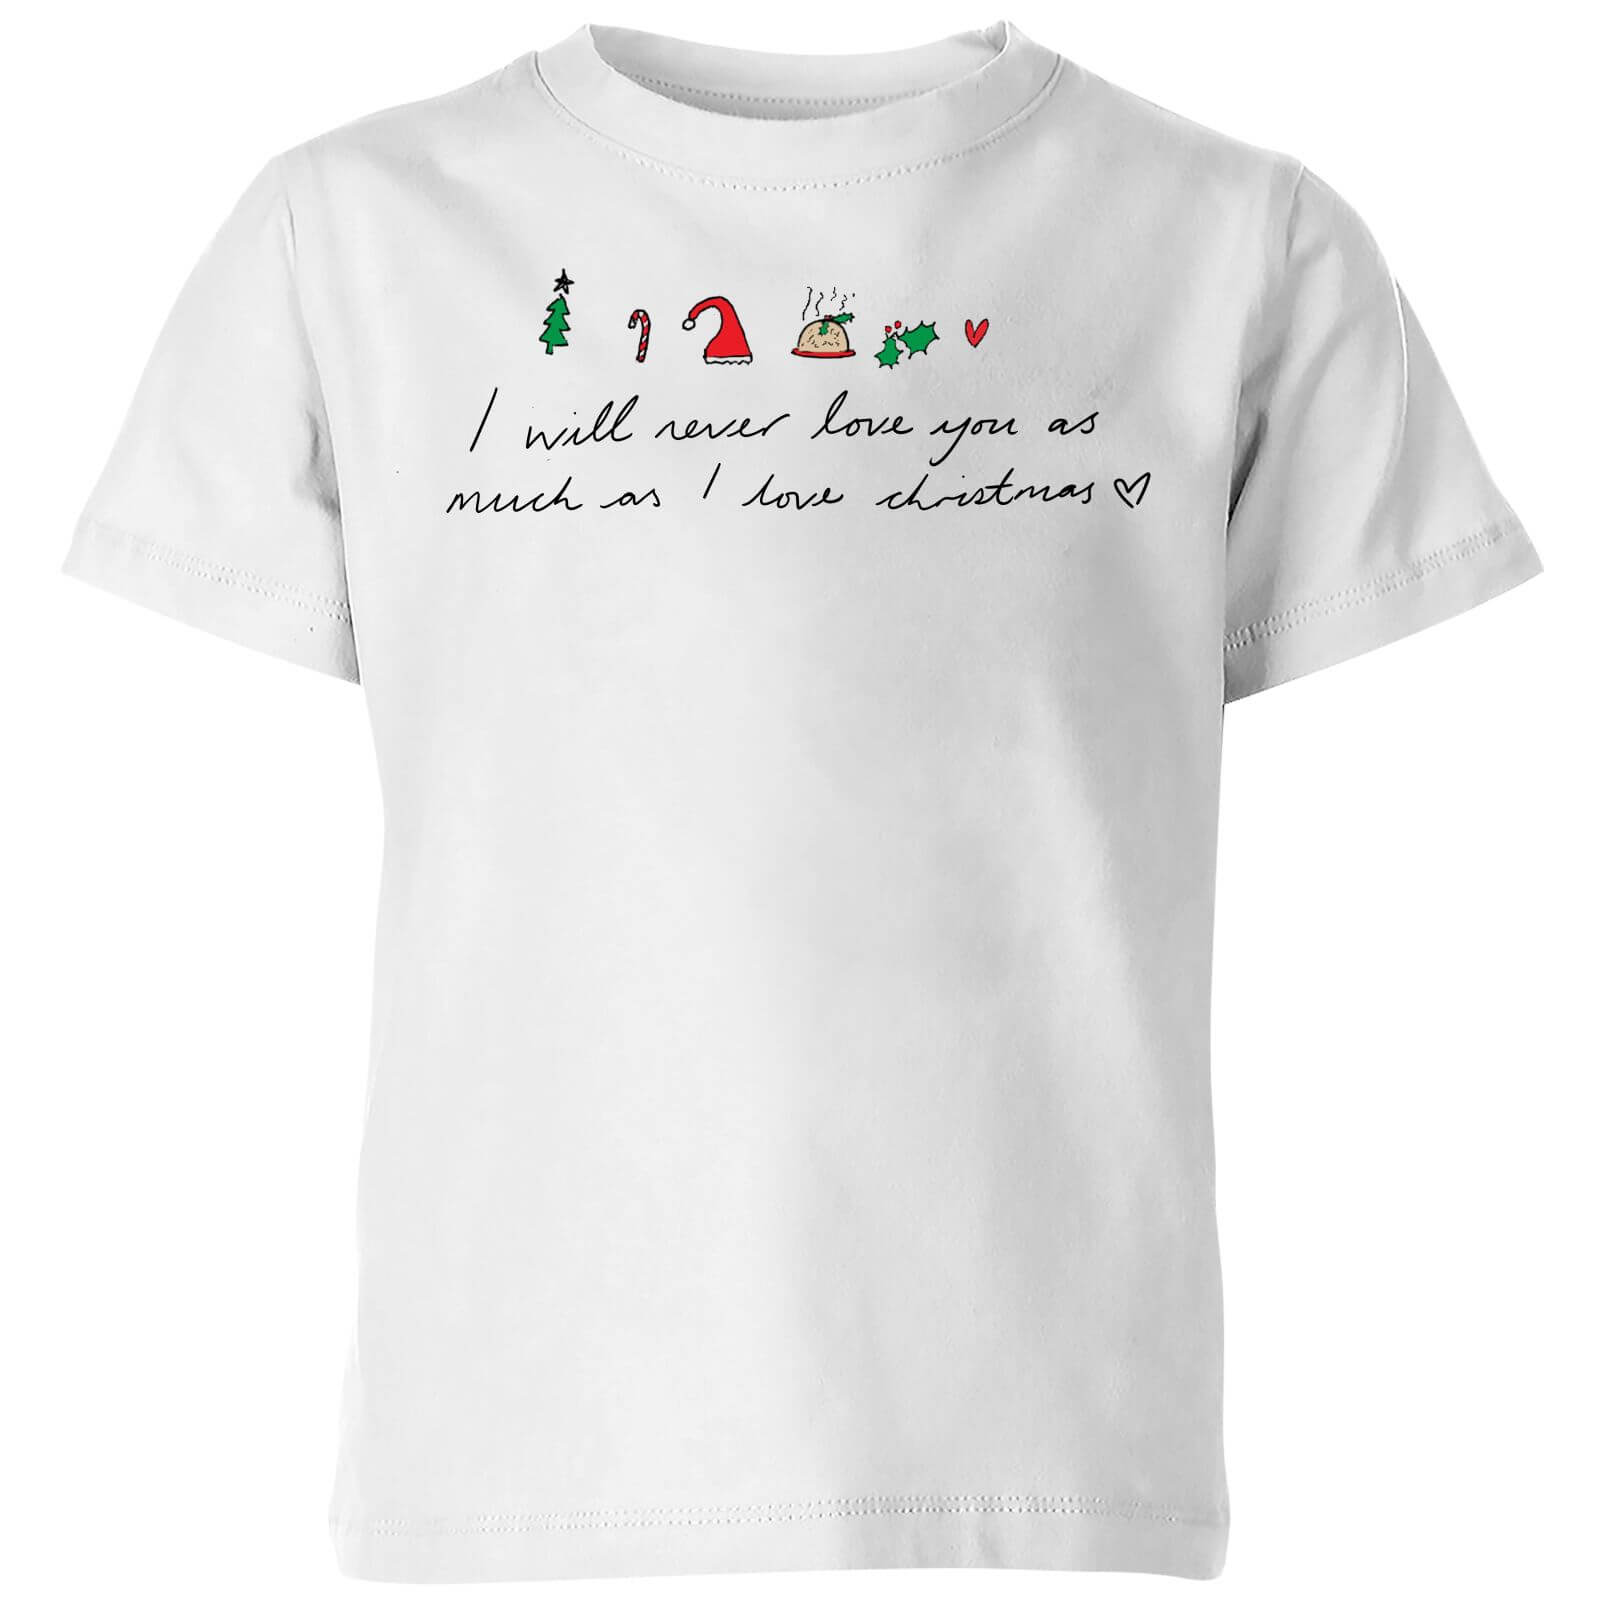 I Will Never Love You As Much As I Love Christmas - Emojis Kids' T-Shirt - White - 3-4 Years - White